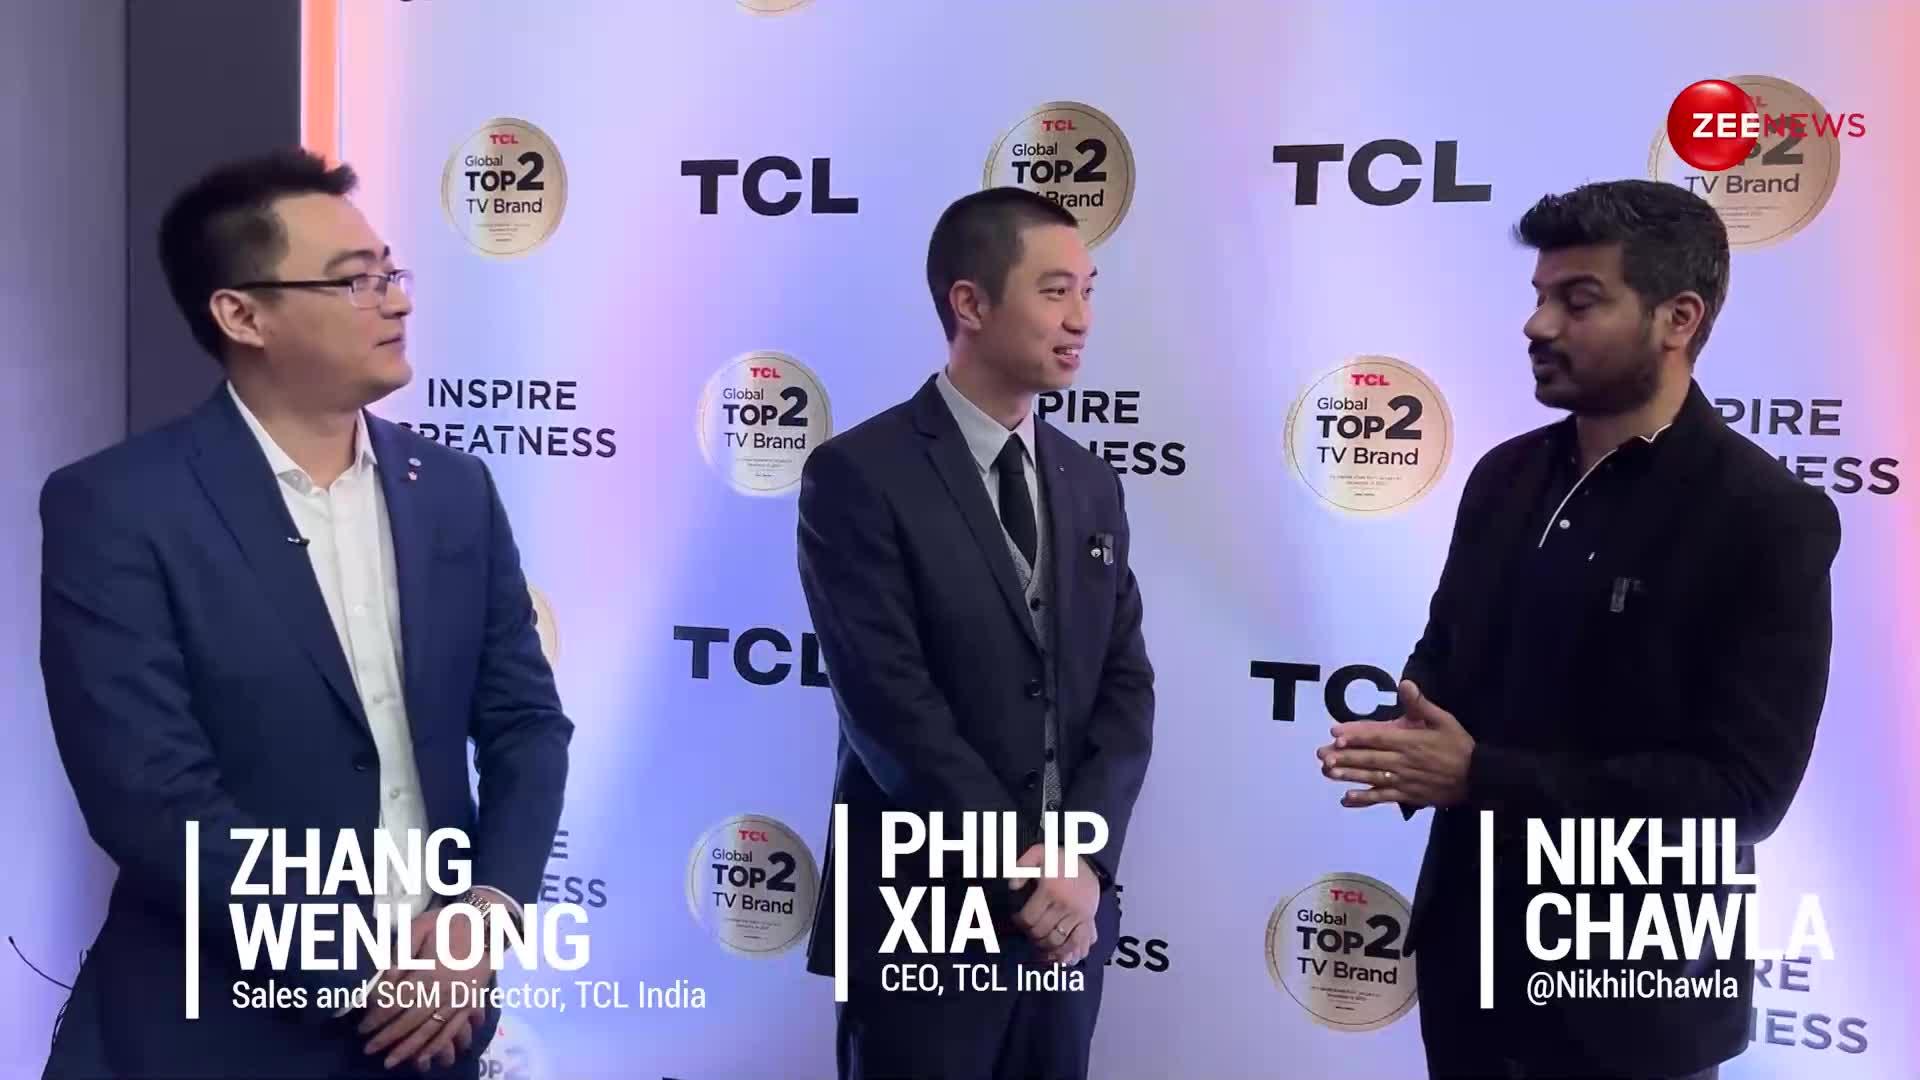 Exclusive interview with TCL India, CEO Philip Xia and Sales and SCM Director, Zhang Wenlong